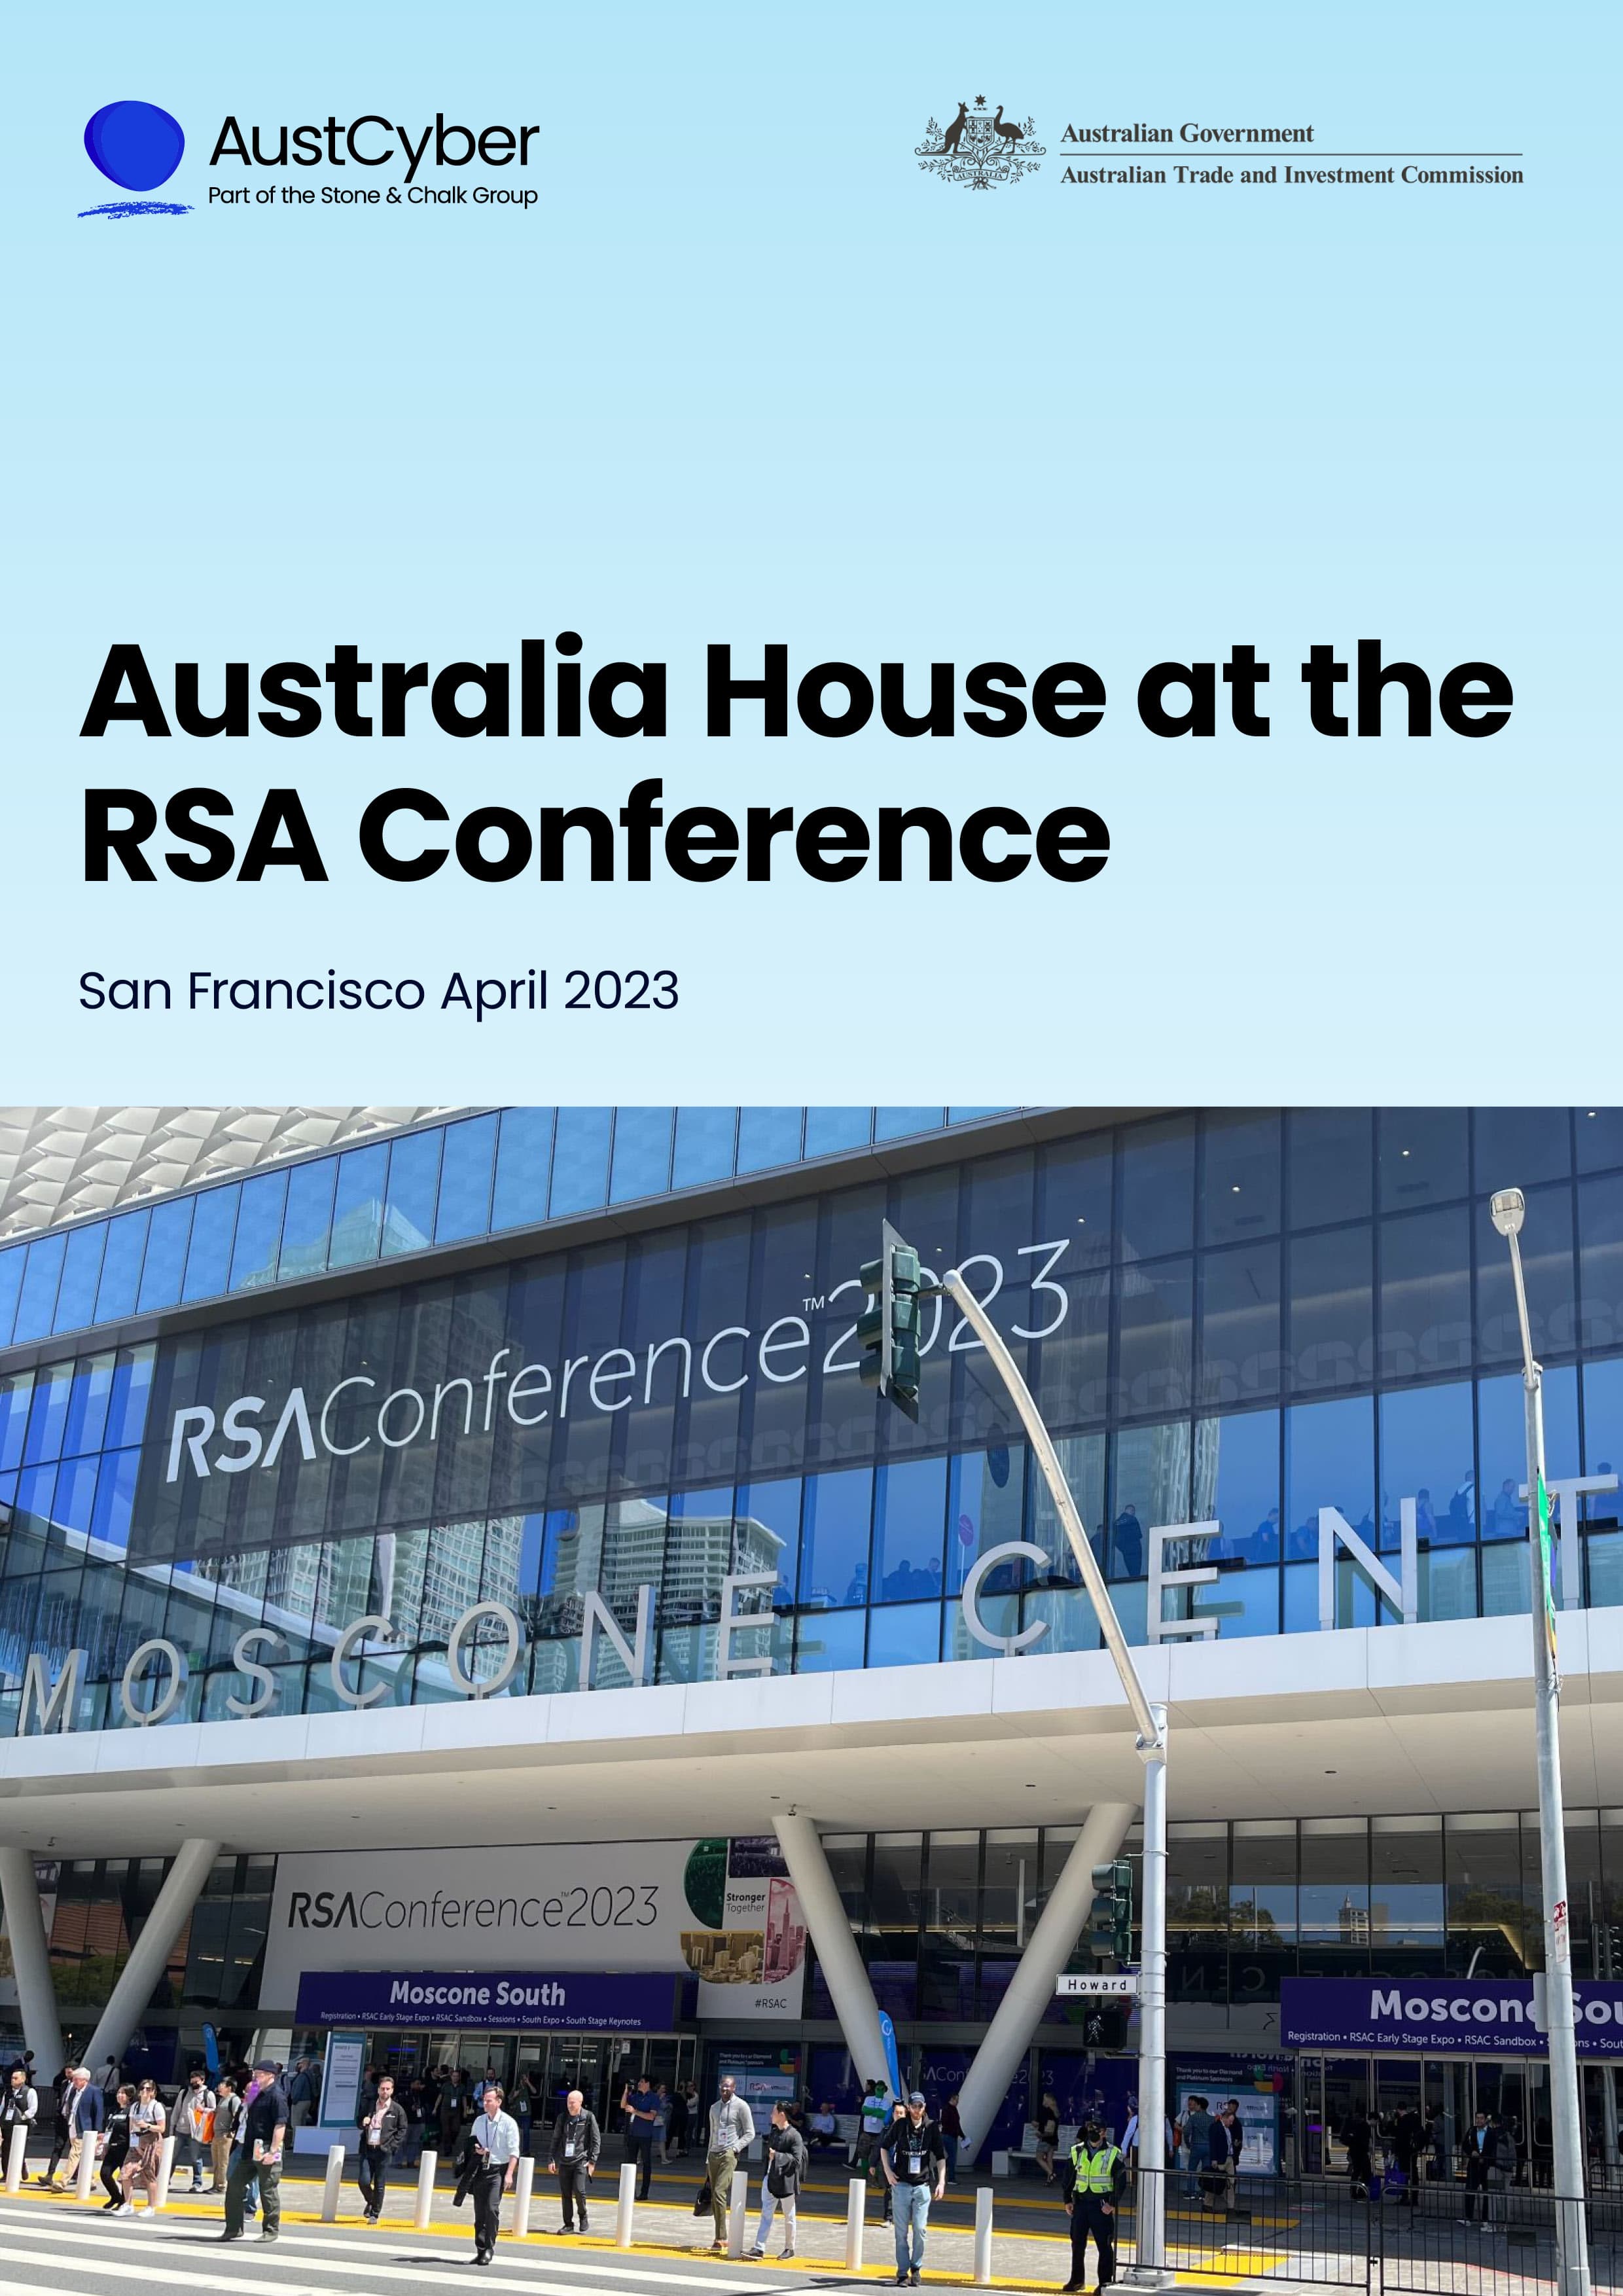 Black text saying 'Australia House at the RSA Conference, San Francisco April 2023' sits below logos for AustCyber and Austrade, set against a light blue background. The bottom half of the page shows the outside of a conference centre in San Francisco with the banner saying 'RSA Conference 2023'.